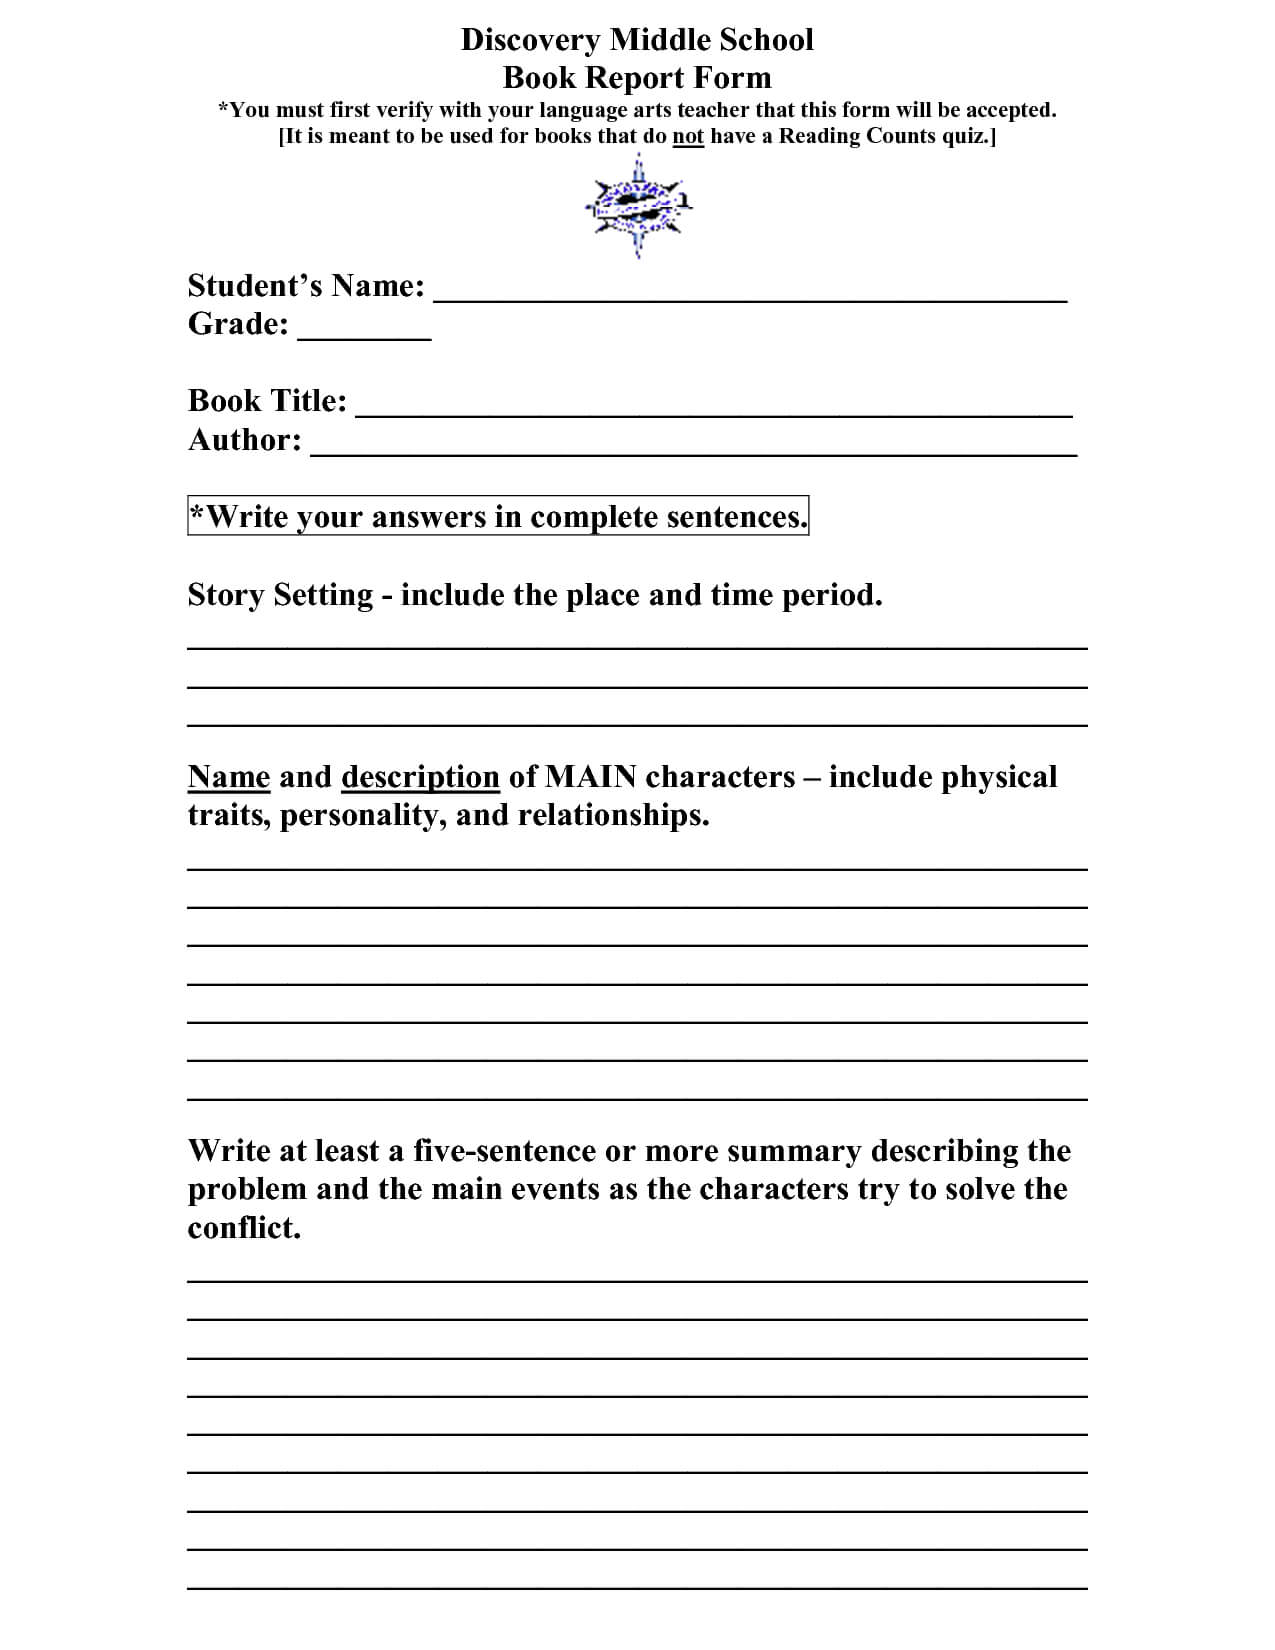 Scope Of Work Template | Teaching & Learning | Middle School Within Book Report Template Middle School